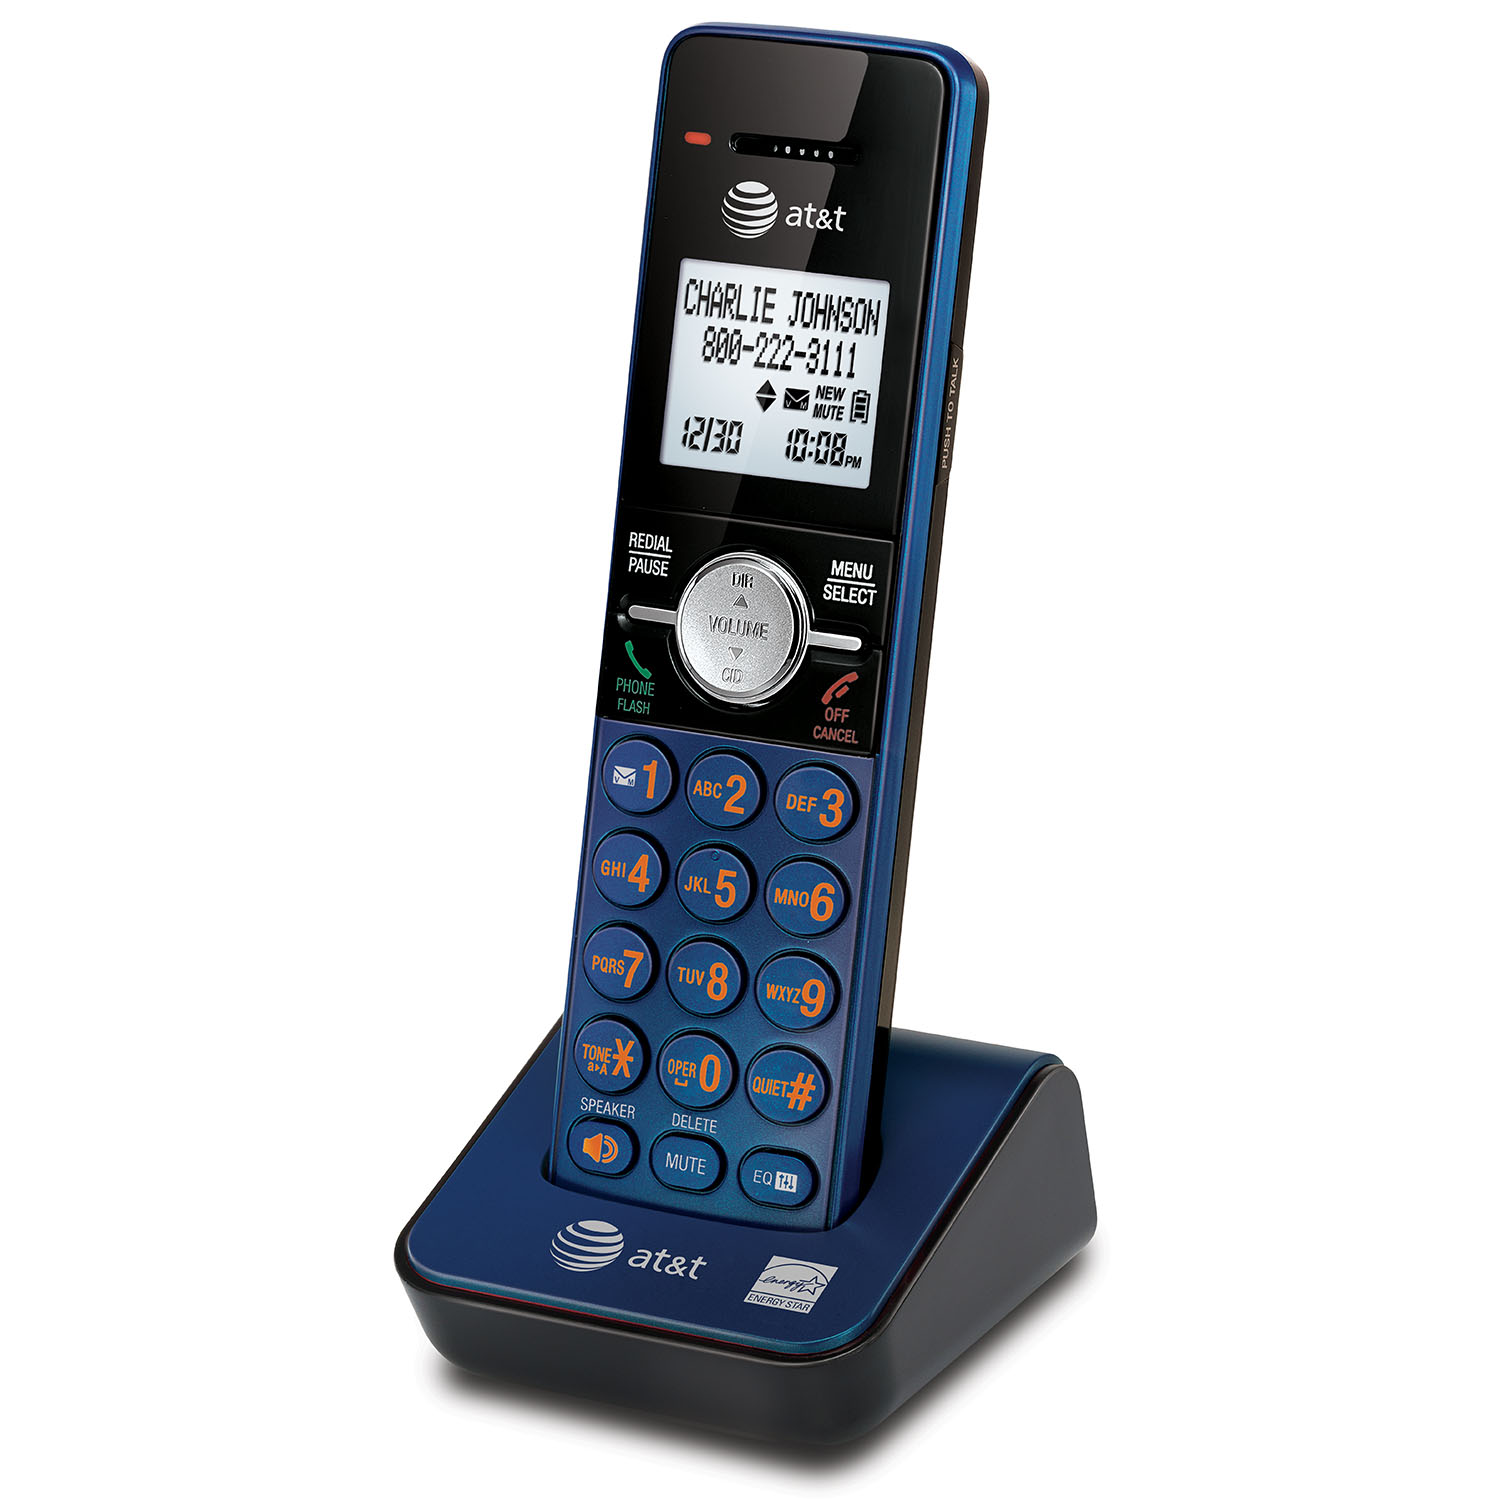 3 handset cordless answering system with caller ID/call waiting - view 4